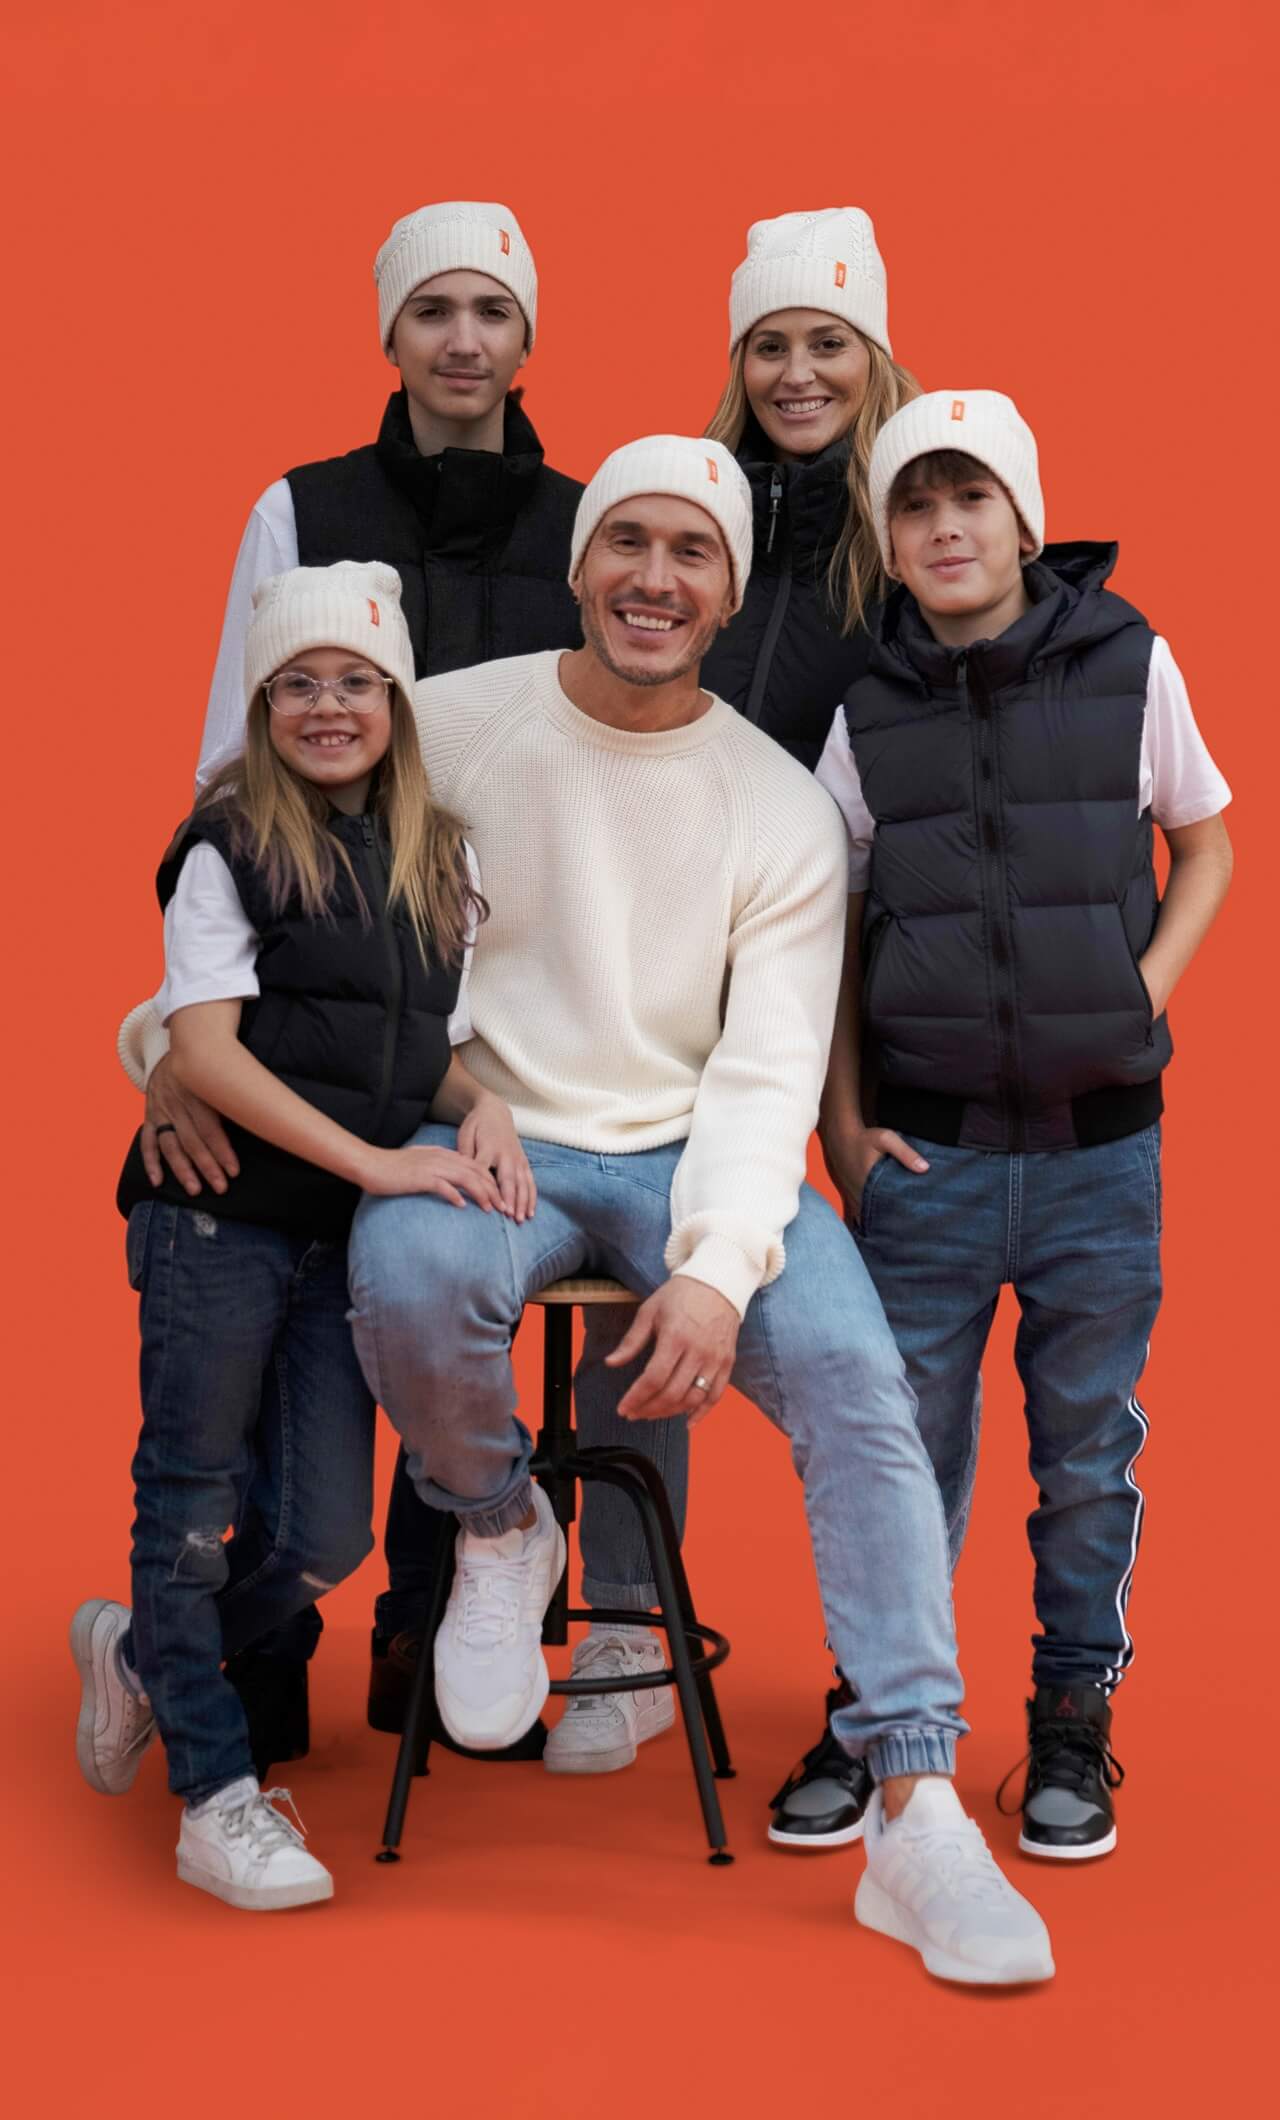 Portrait of Shawn Desman and his family on an orange backdrop.